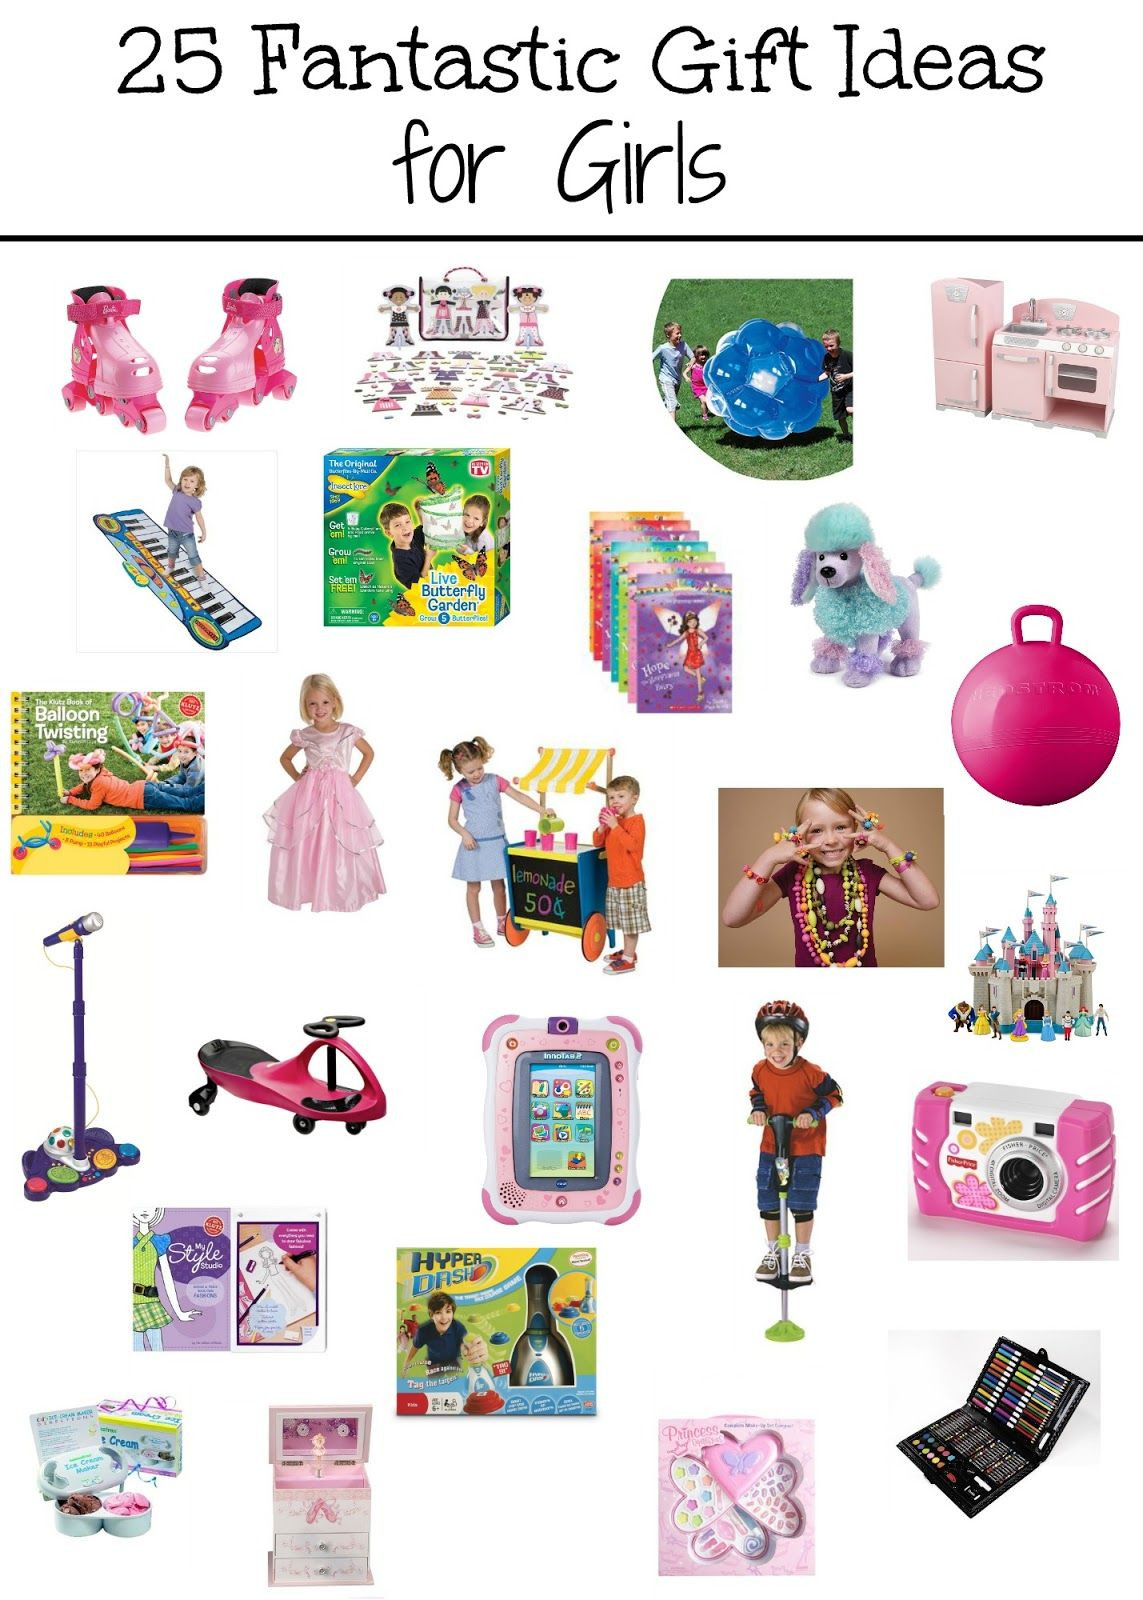 Top Gift Ideas For Girls
 25 Fantastic Gift Ideas for Girls Educational toys